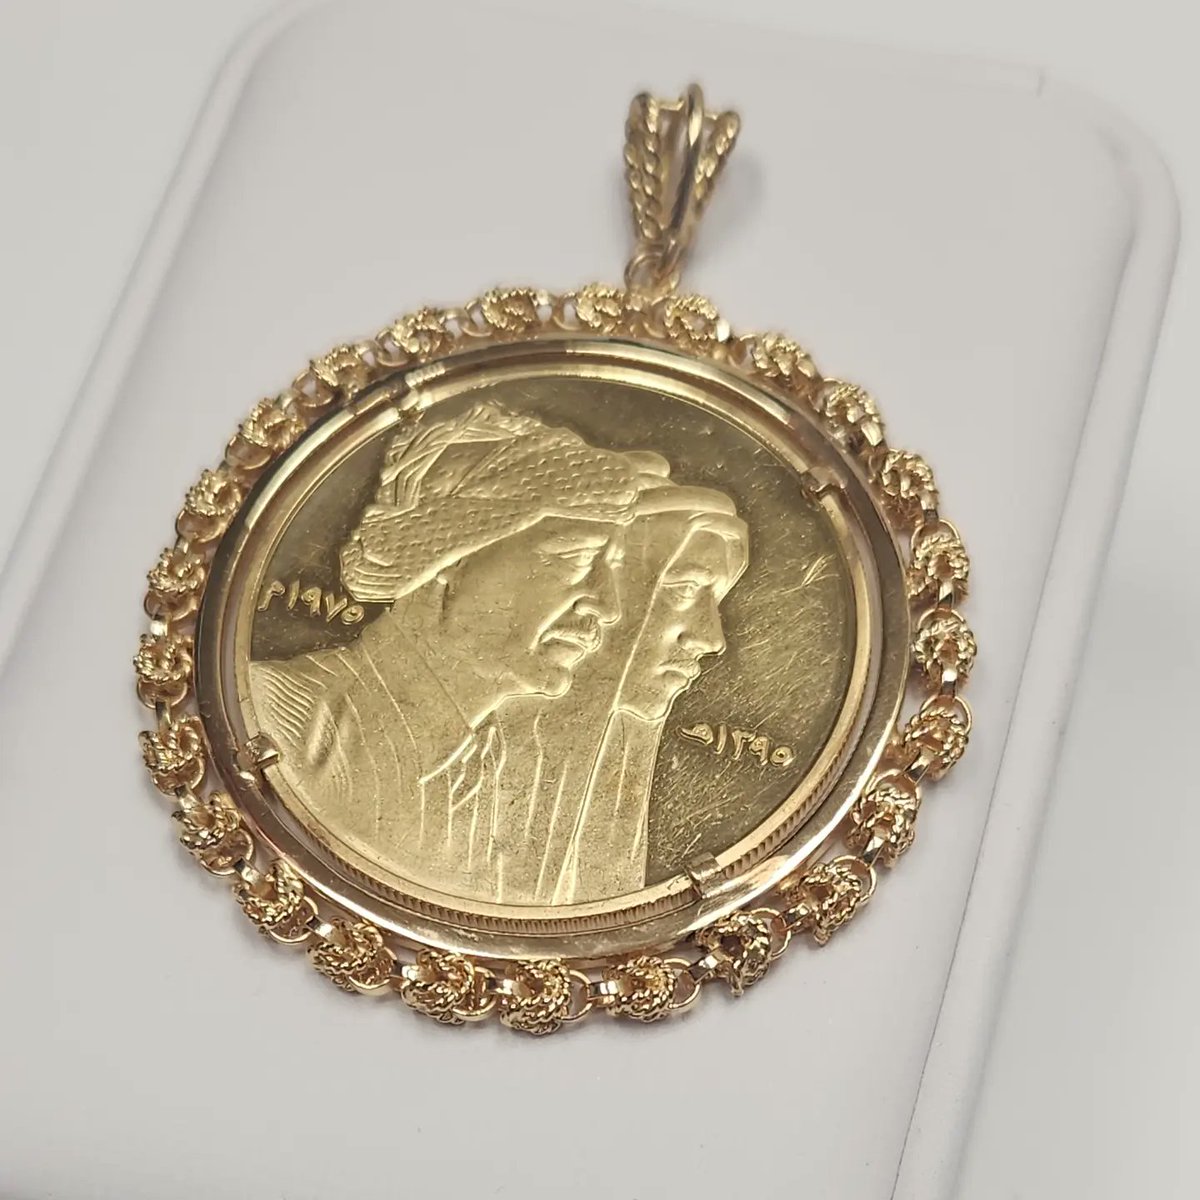 🔥 Vintage 

A rare 22 karat gold coin with this type of frame.

@bidrussianjewelery #bidrussianjewelery 
@manail_bidrussian #manailbidrussian

#goldcoin #goldcoins #coinlovers #coincollectors #22karats #22karatgold
#22karatjewellery #22karatjewelry #goldshop #goldbusiness #GOLD